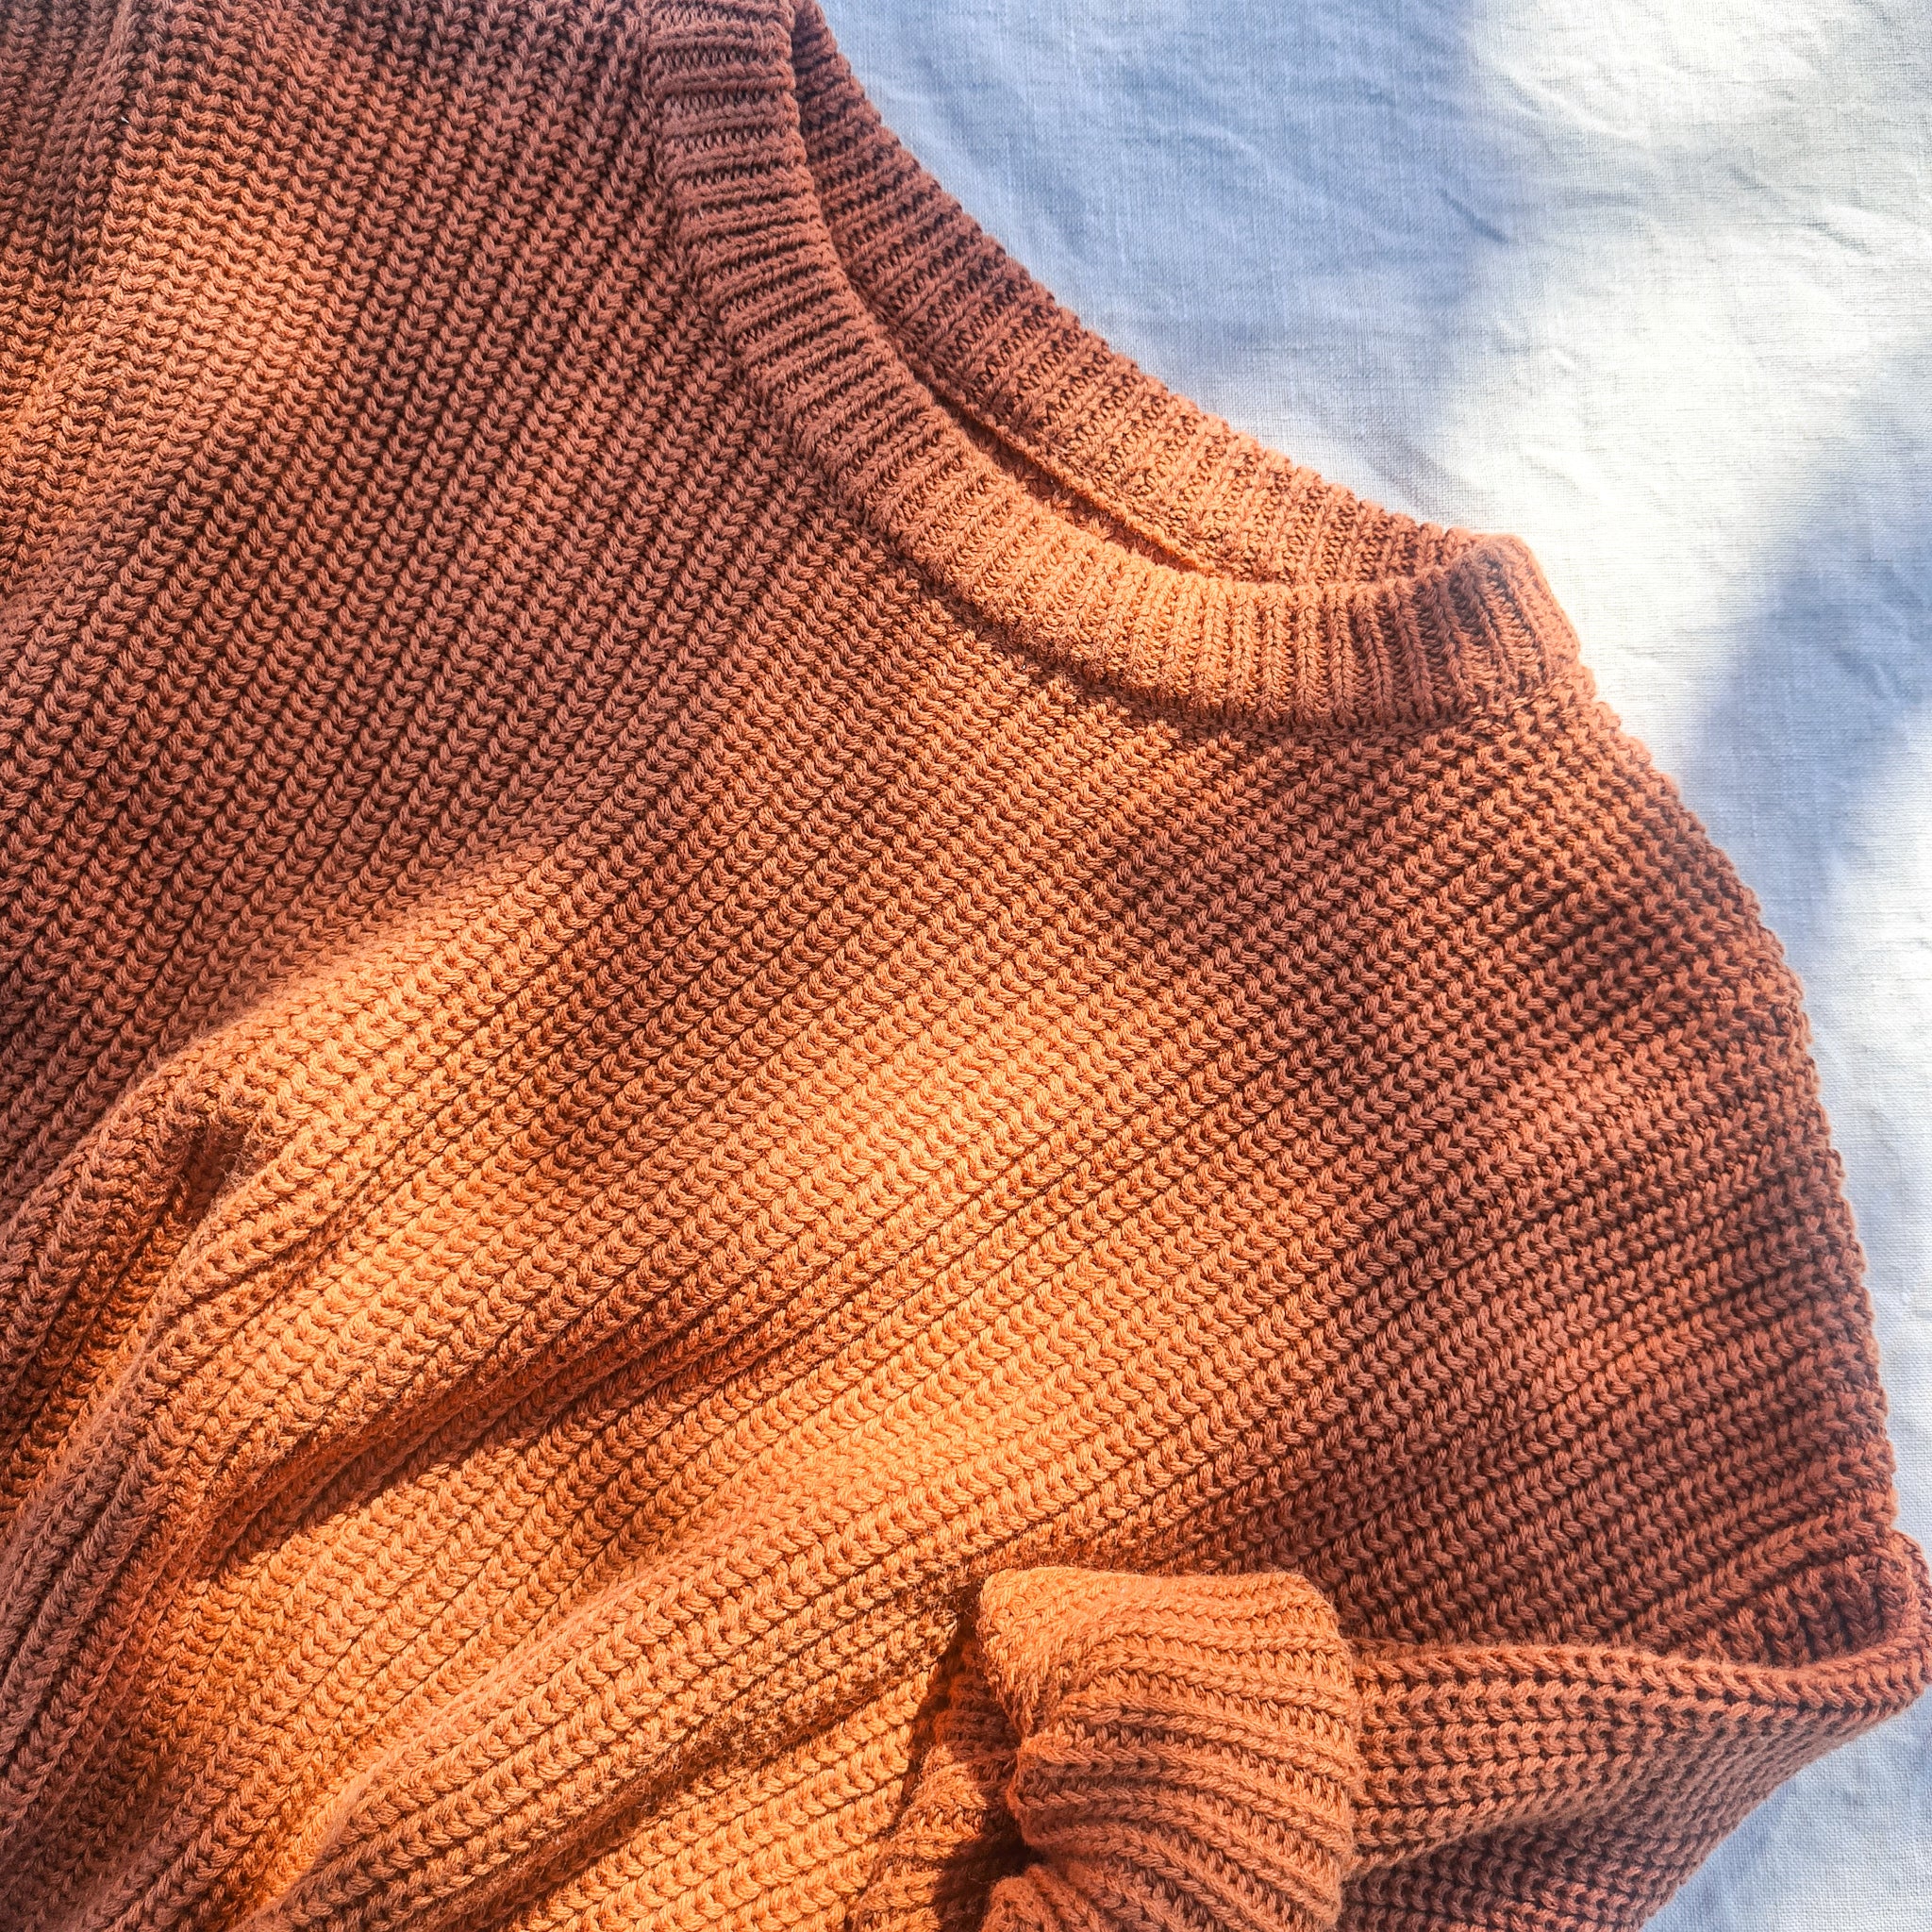 Rust orange chunky knit for toddler